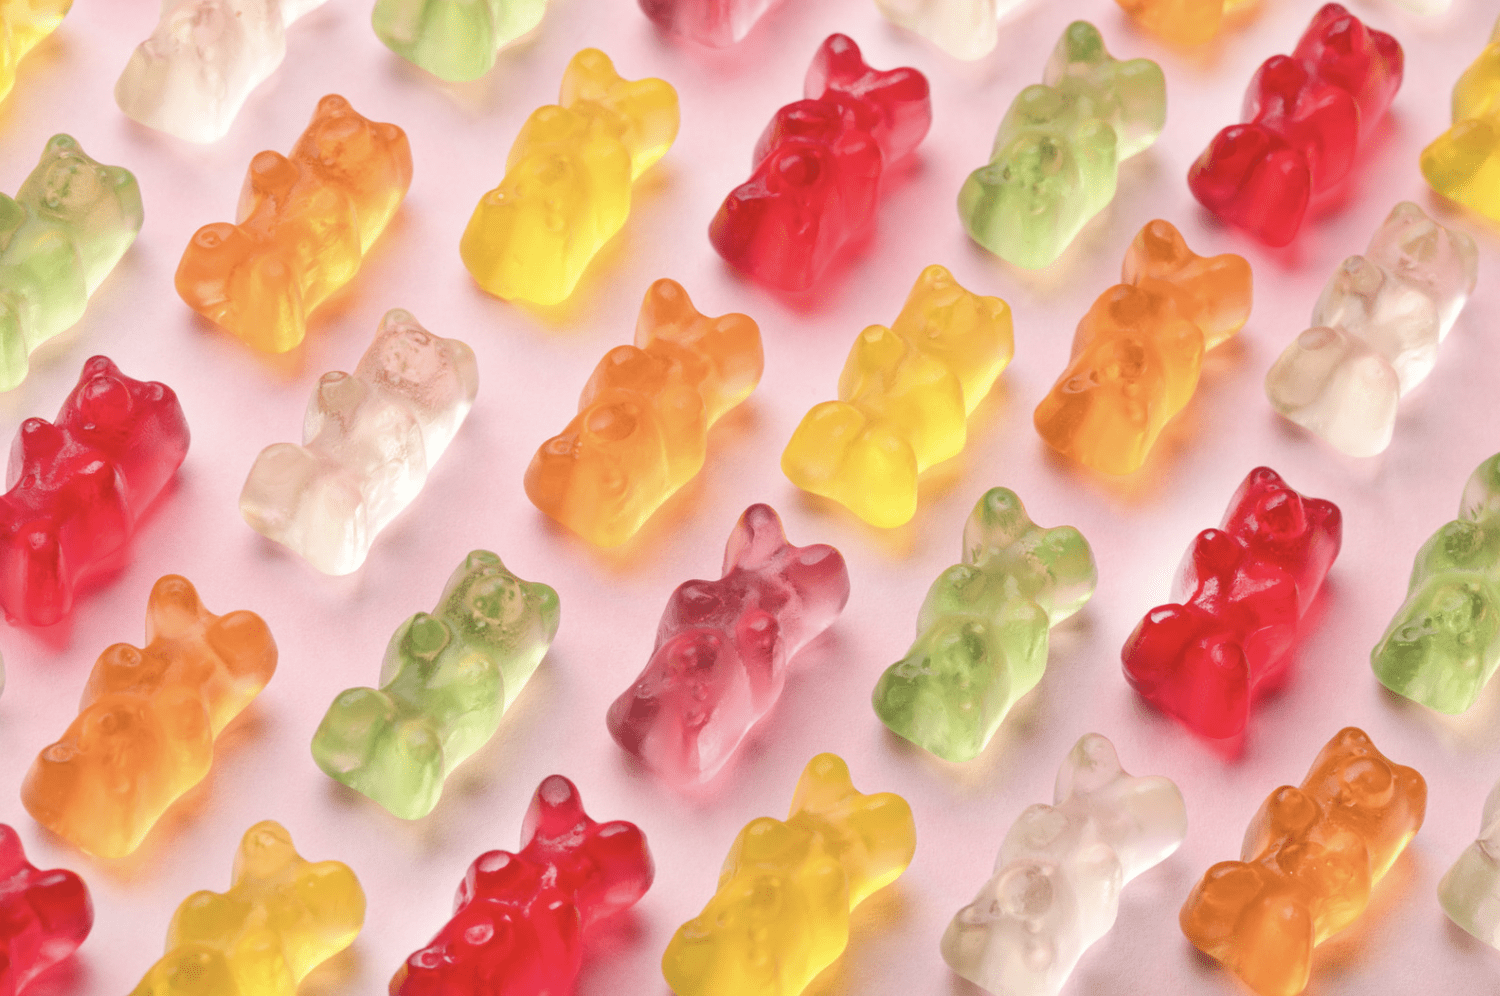 Have fun with these gummy bears as you experiment.